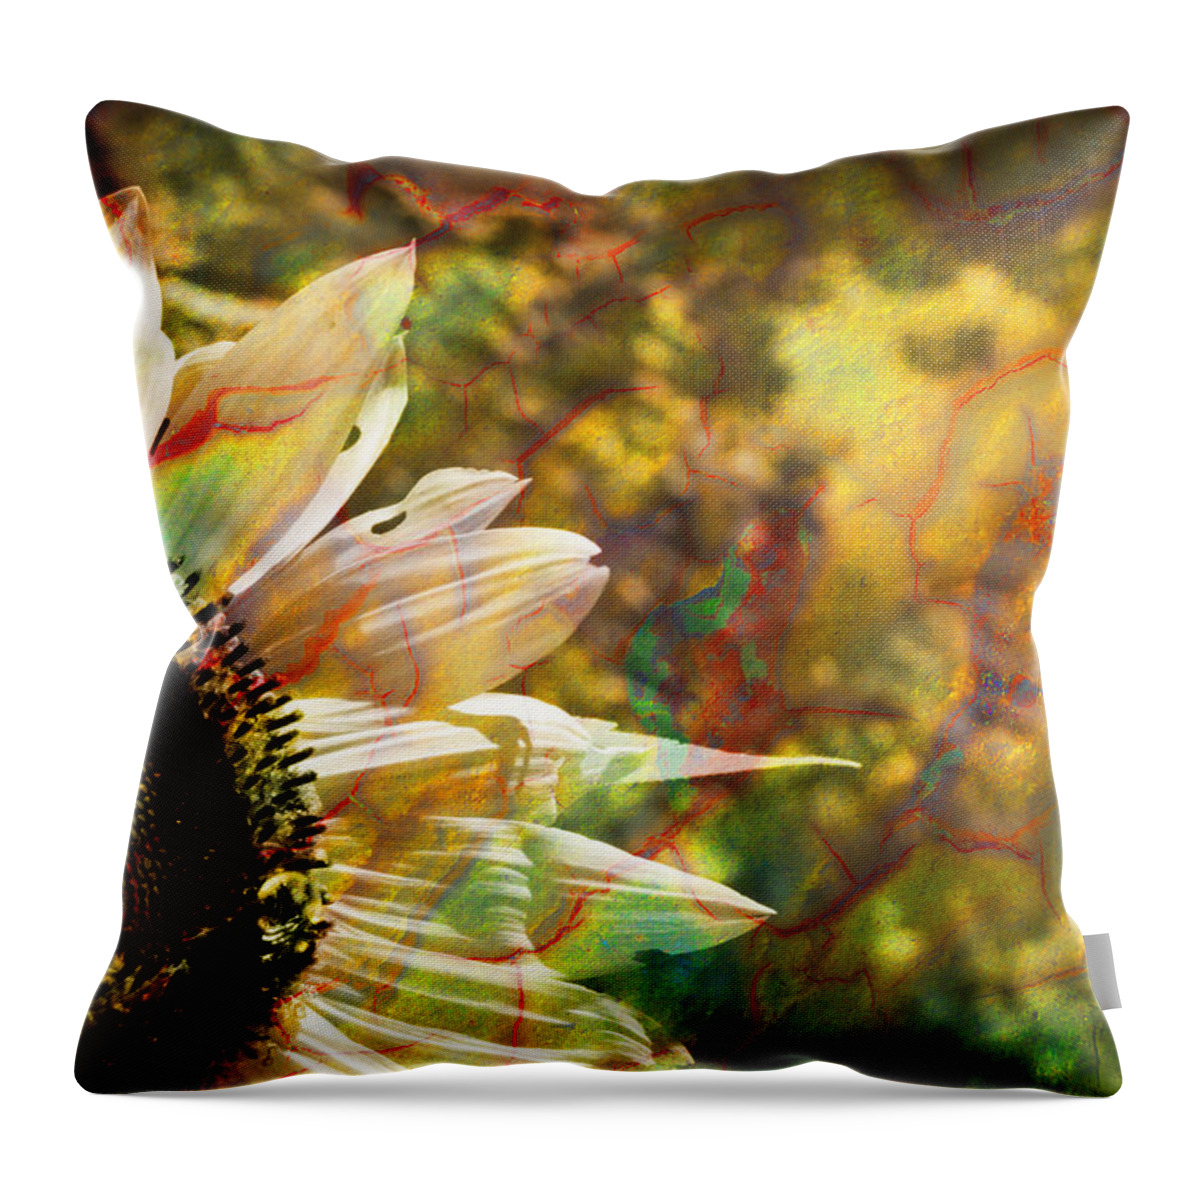 Sunflower Throw Pillow featuring the photograph Whimsical Sunflower by Luke Moore